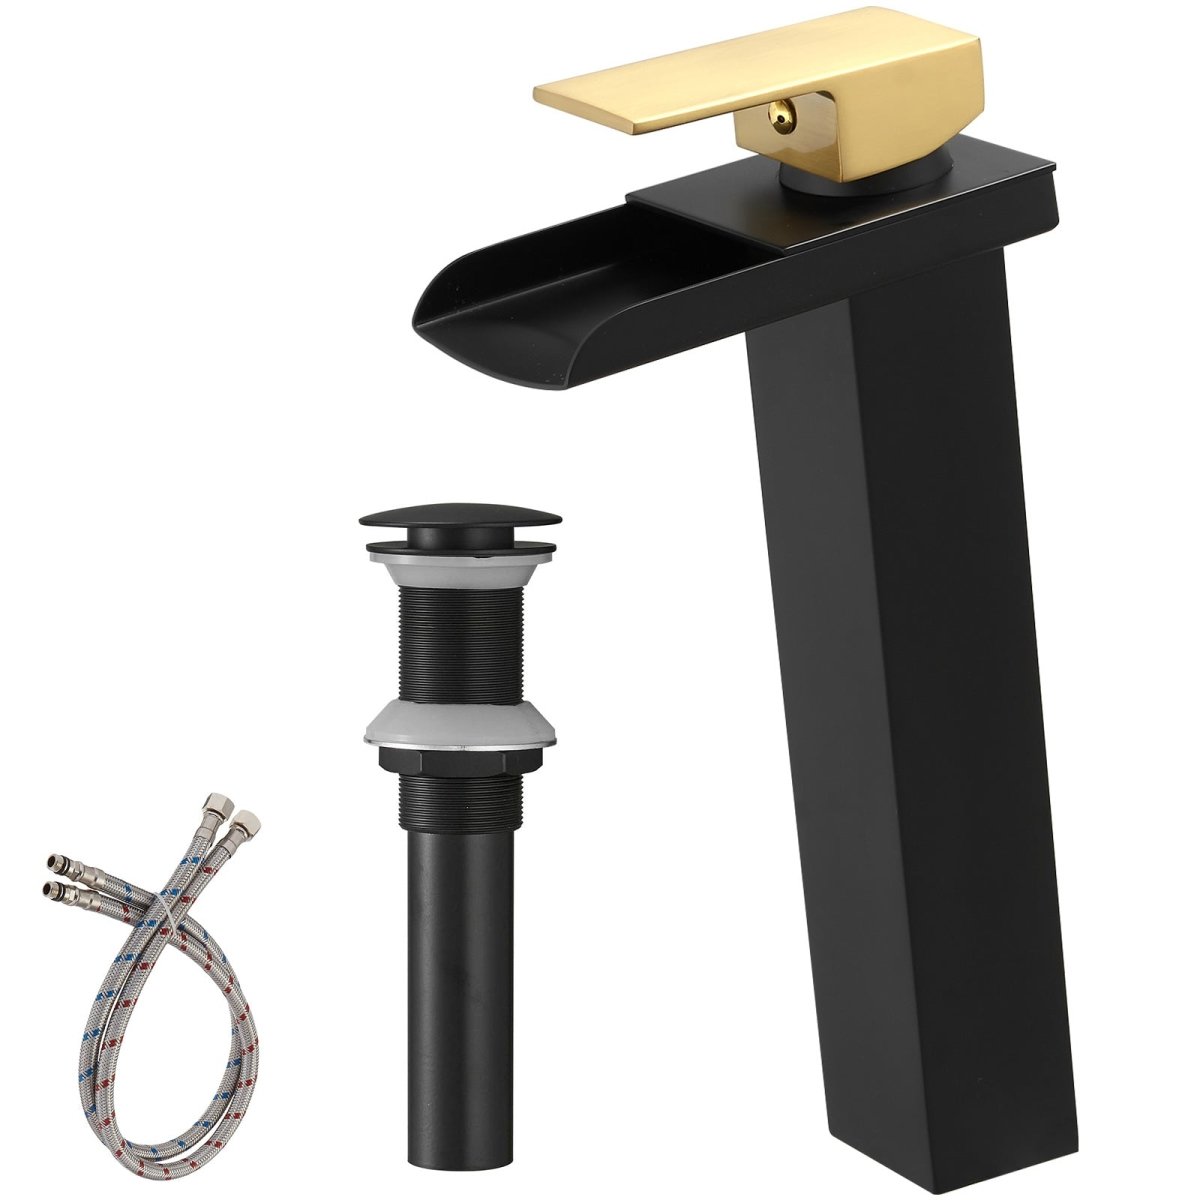 Single Hole Bathroom Sink Faucet with Supply Hose Black Gold - buyfaucet.com